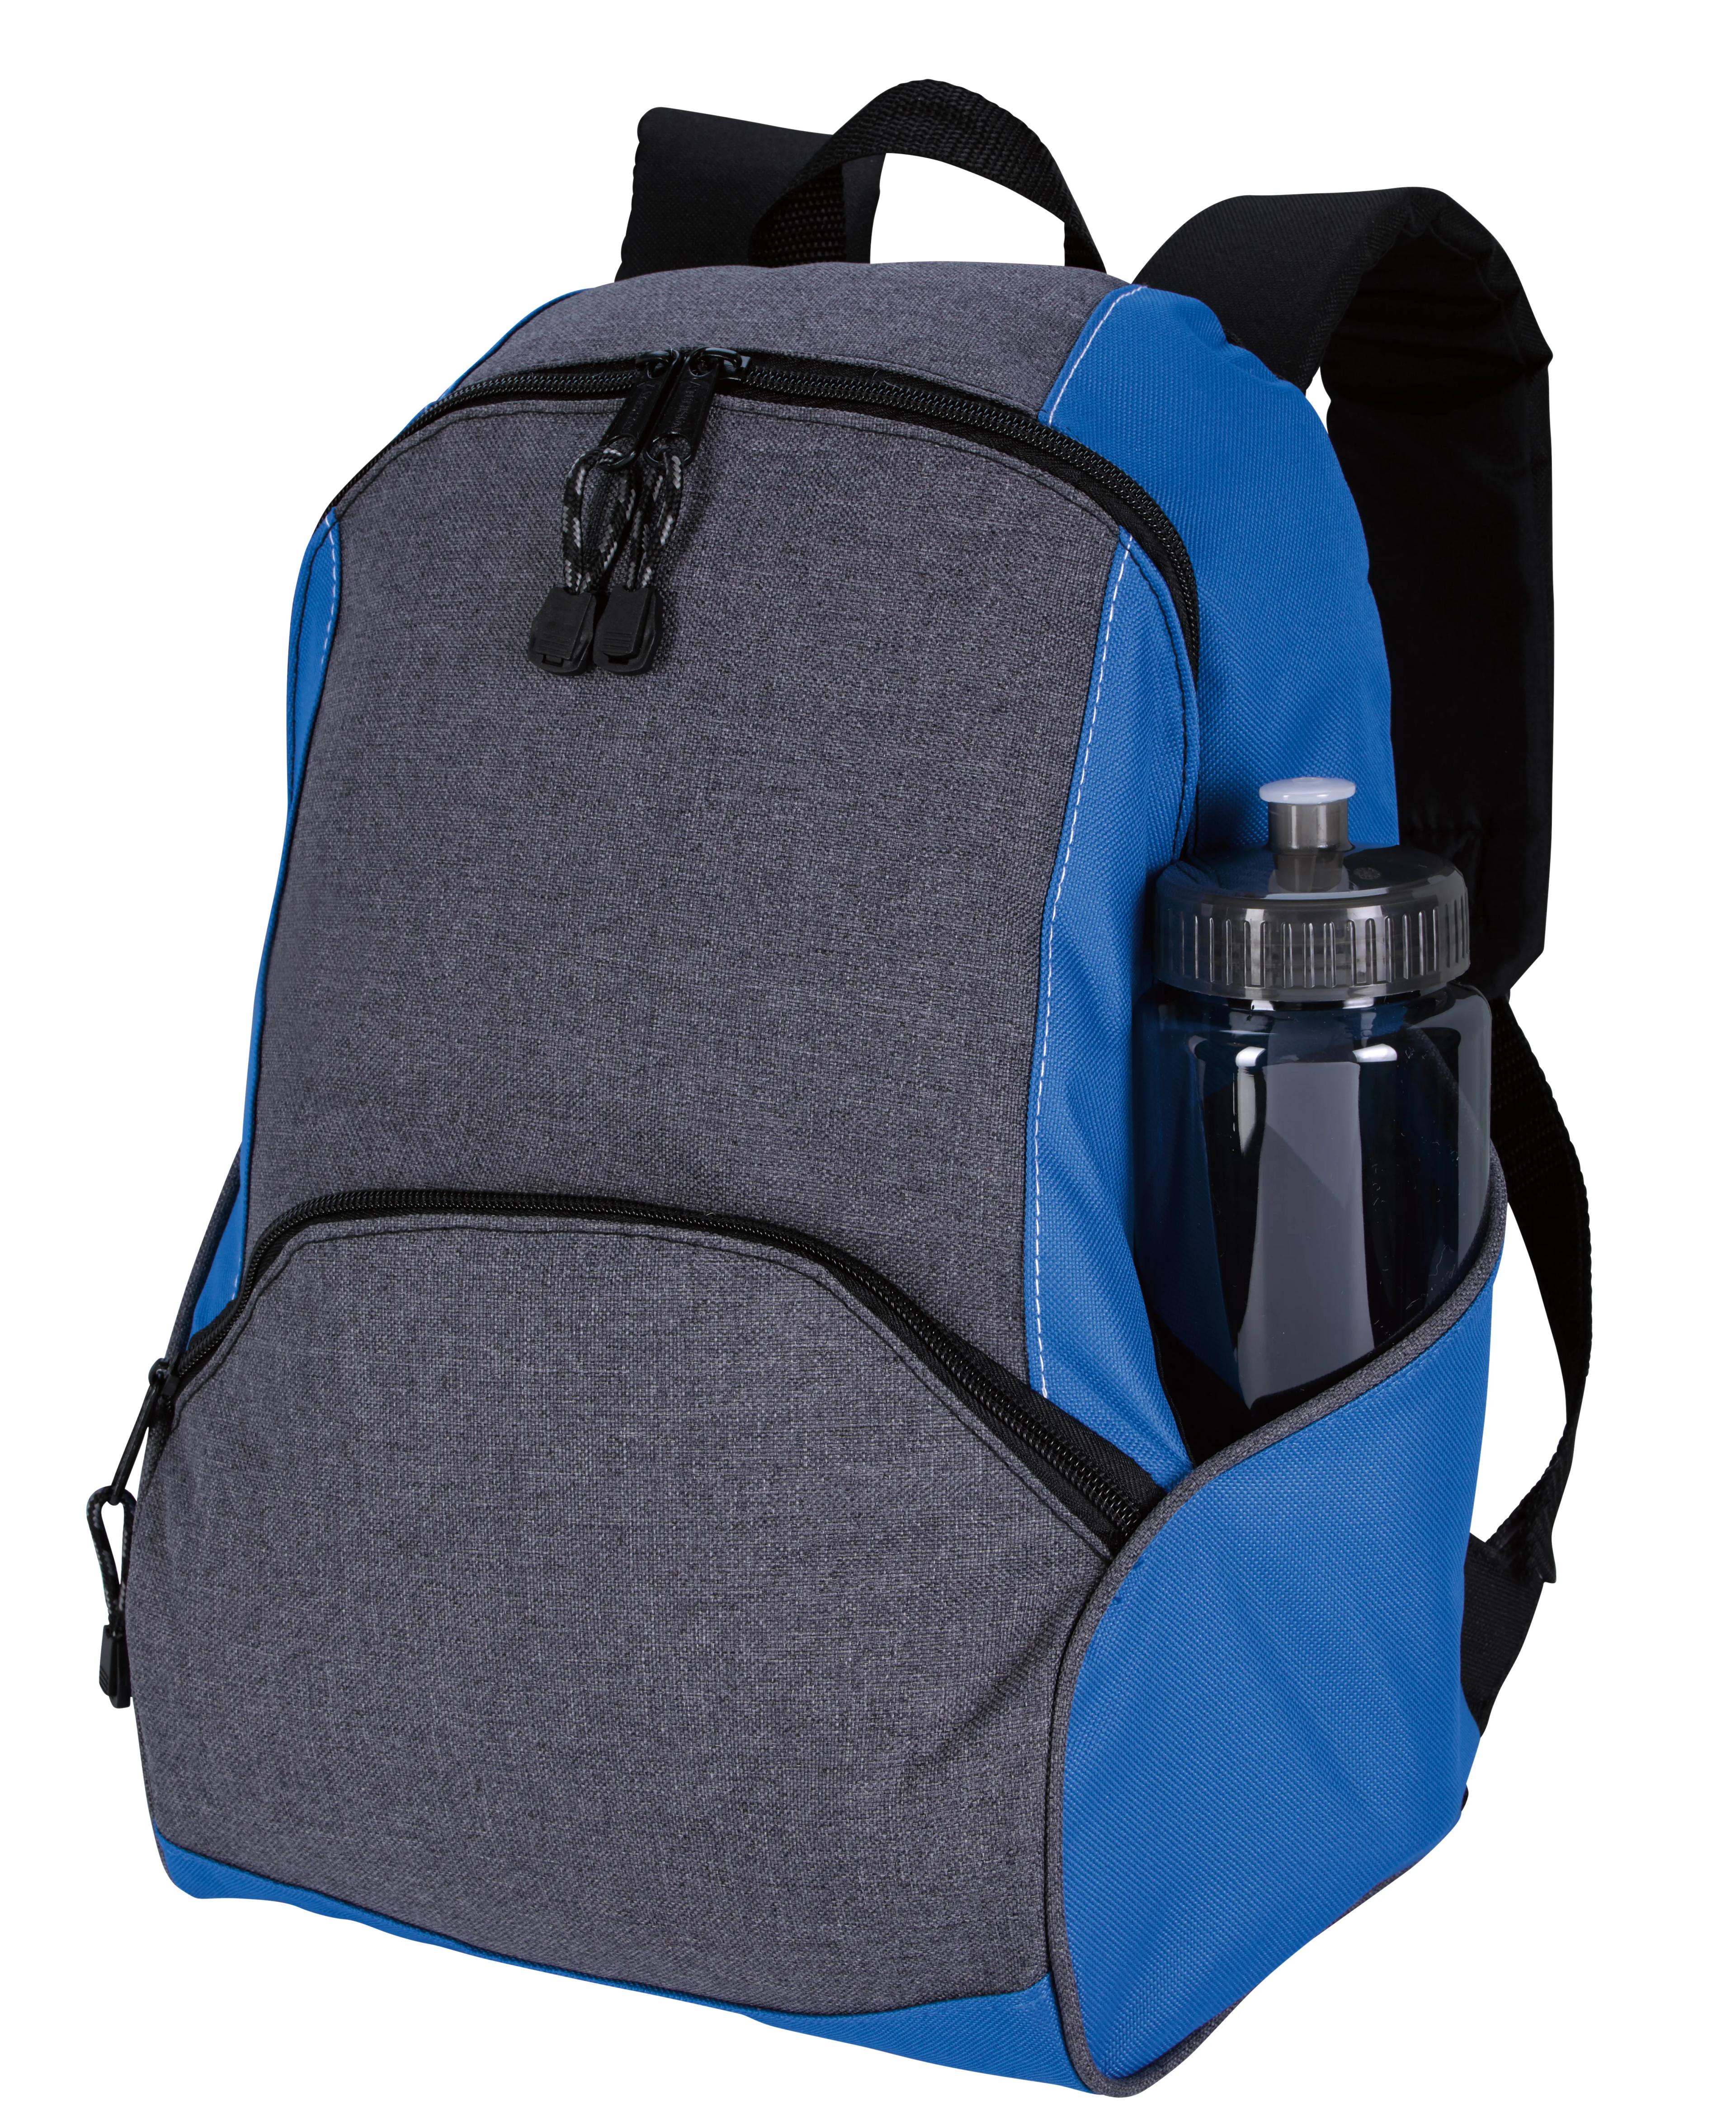 Two-Tone On the Move Backpack 10 of 25